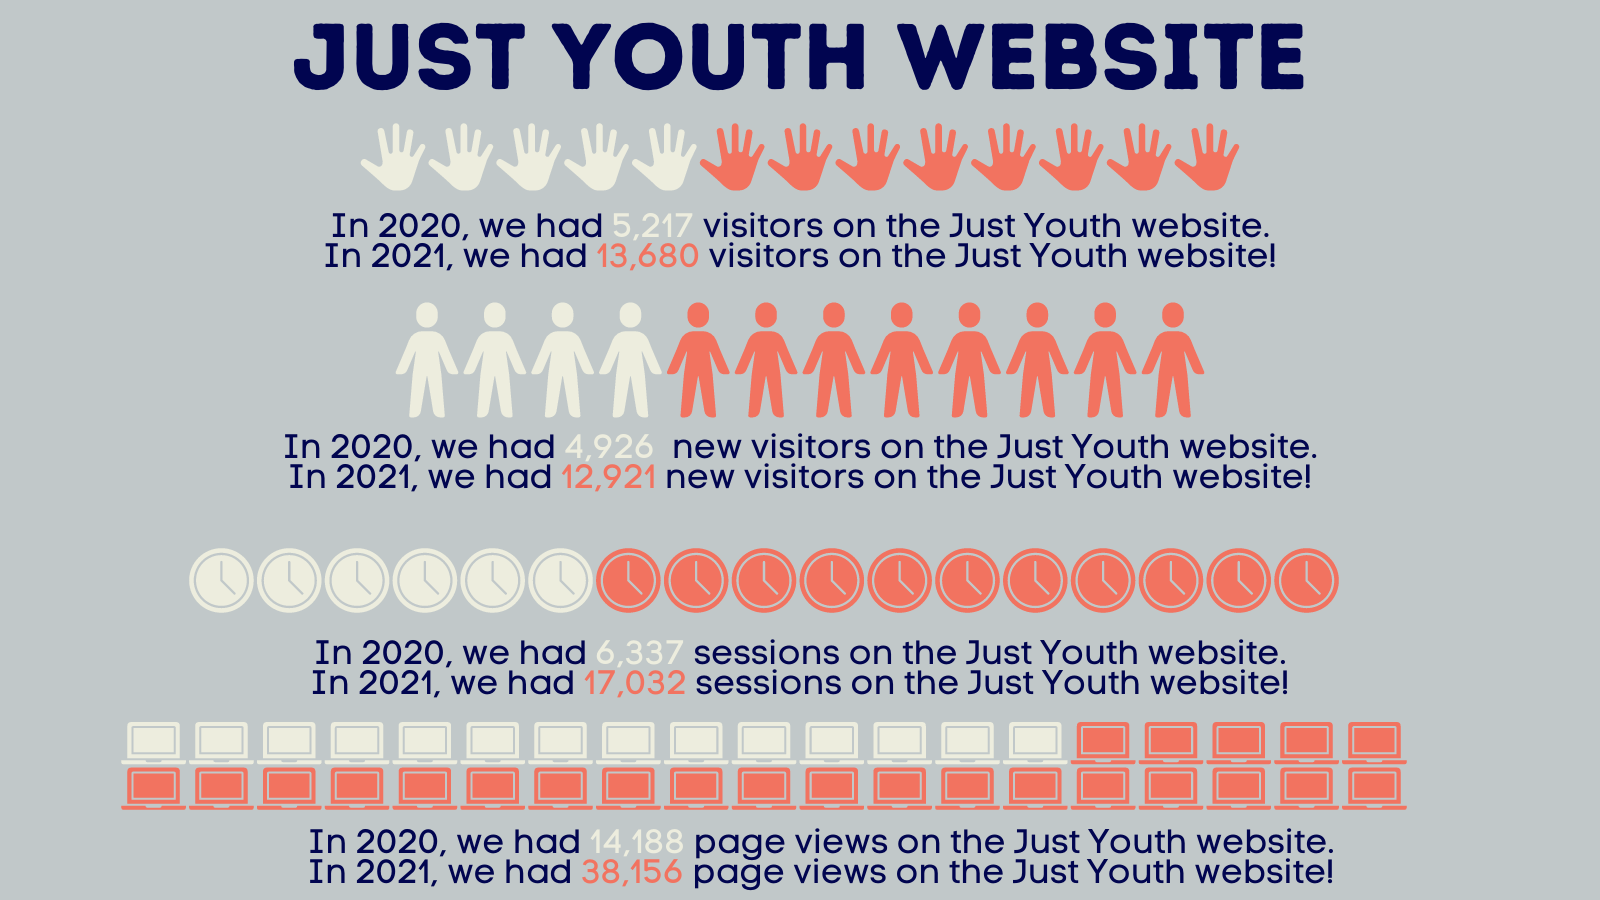 In 2020, we had 5,217 visitors on the Just Youth website. In 2021, we had 13,680 visitors on the Just Youth website! In 2020, we had 4,926 new visitors on the Just Youth website. In 2021, we had 12,921 new visitors on the Just Youth website! In 2020, we had 6,337 sessions on the Just Youth website. In 2021, we had 17,032 sessions on the Just Youth website! In 2020, we had 14,188 page views on the Just Youth website. In 2021, we had 38,156 page views on the Just Youth website!